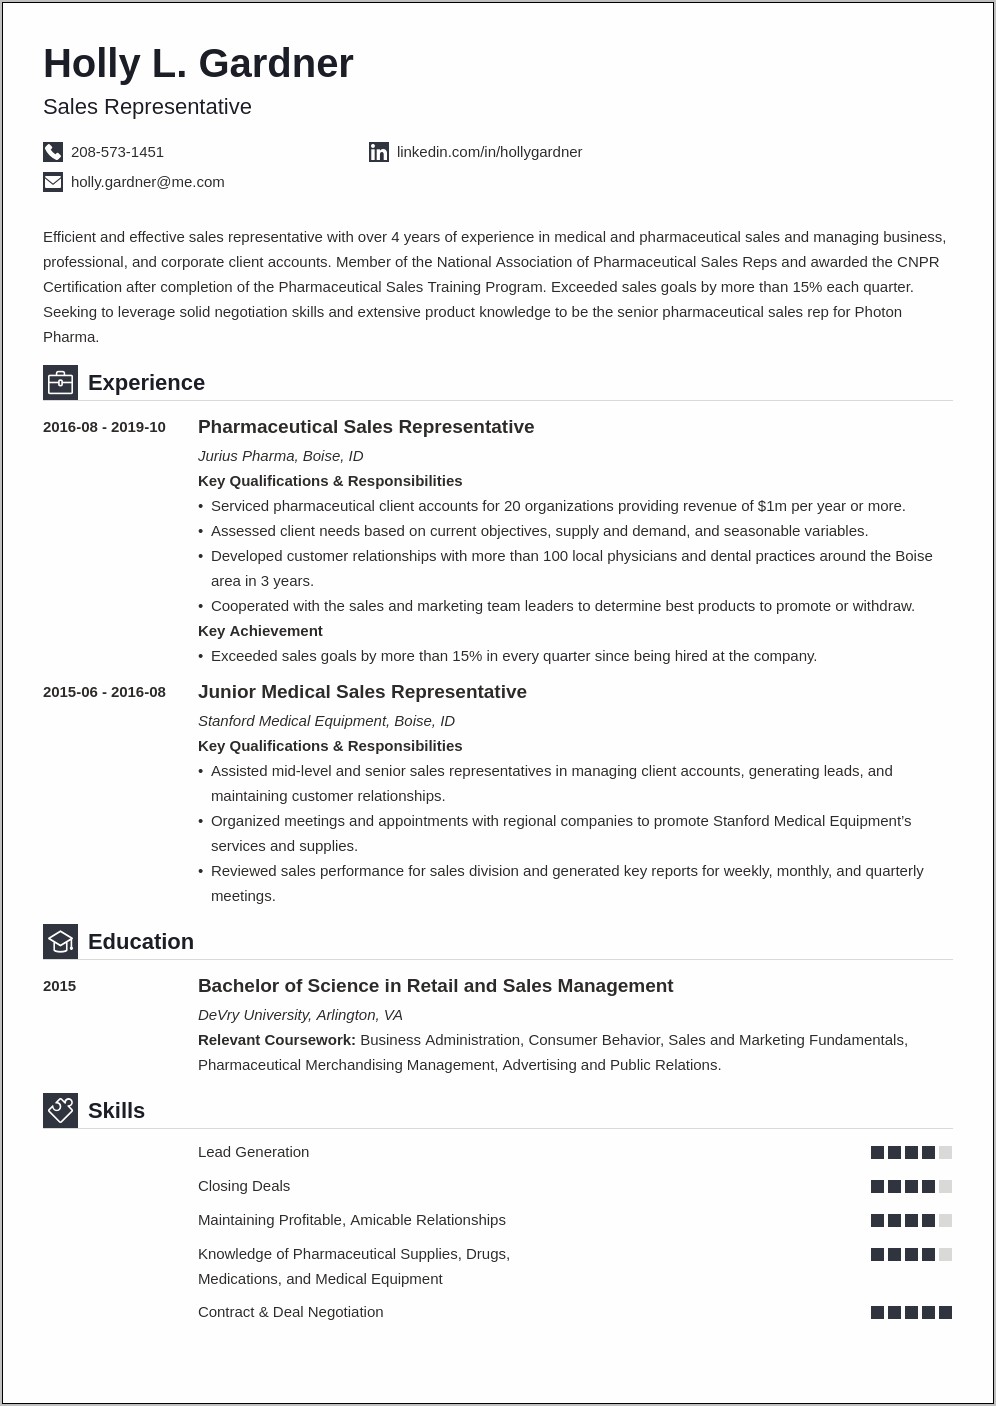 Resume For First Sales Management Position